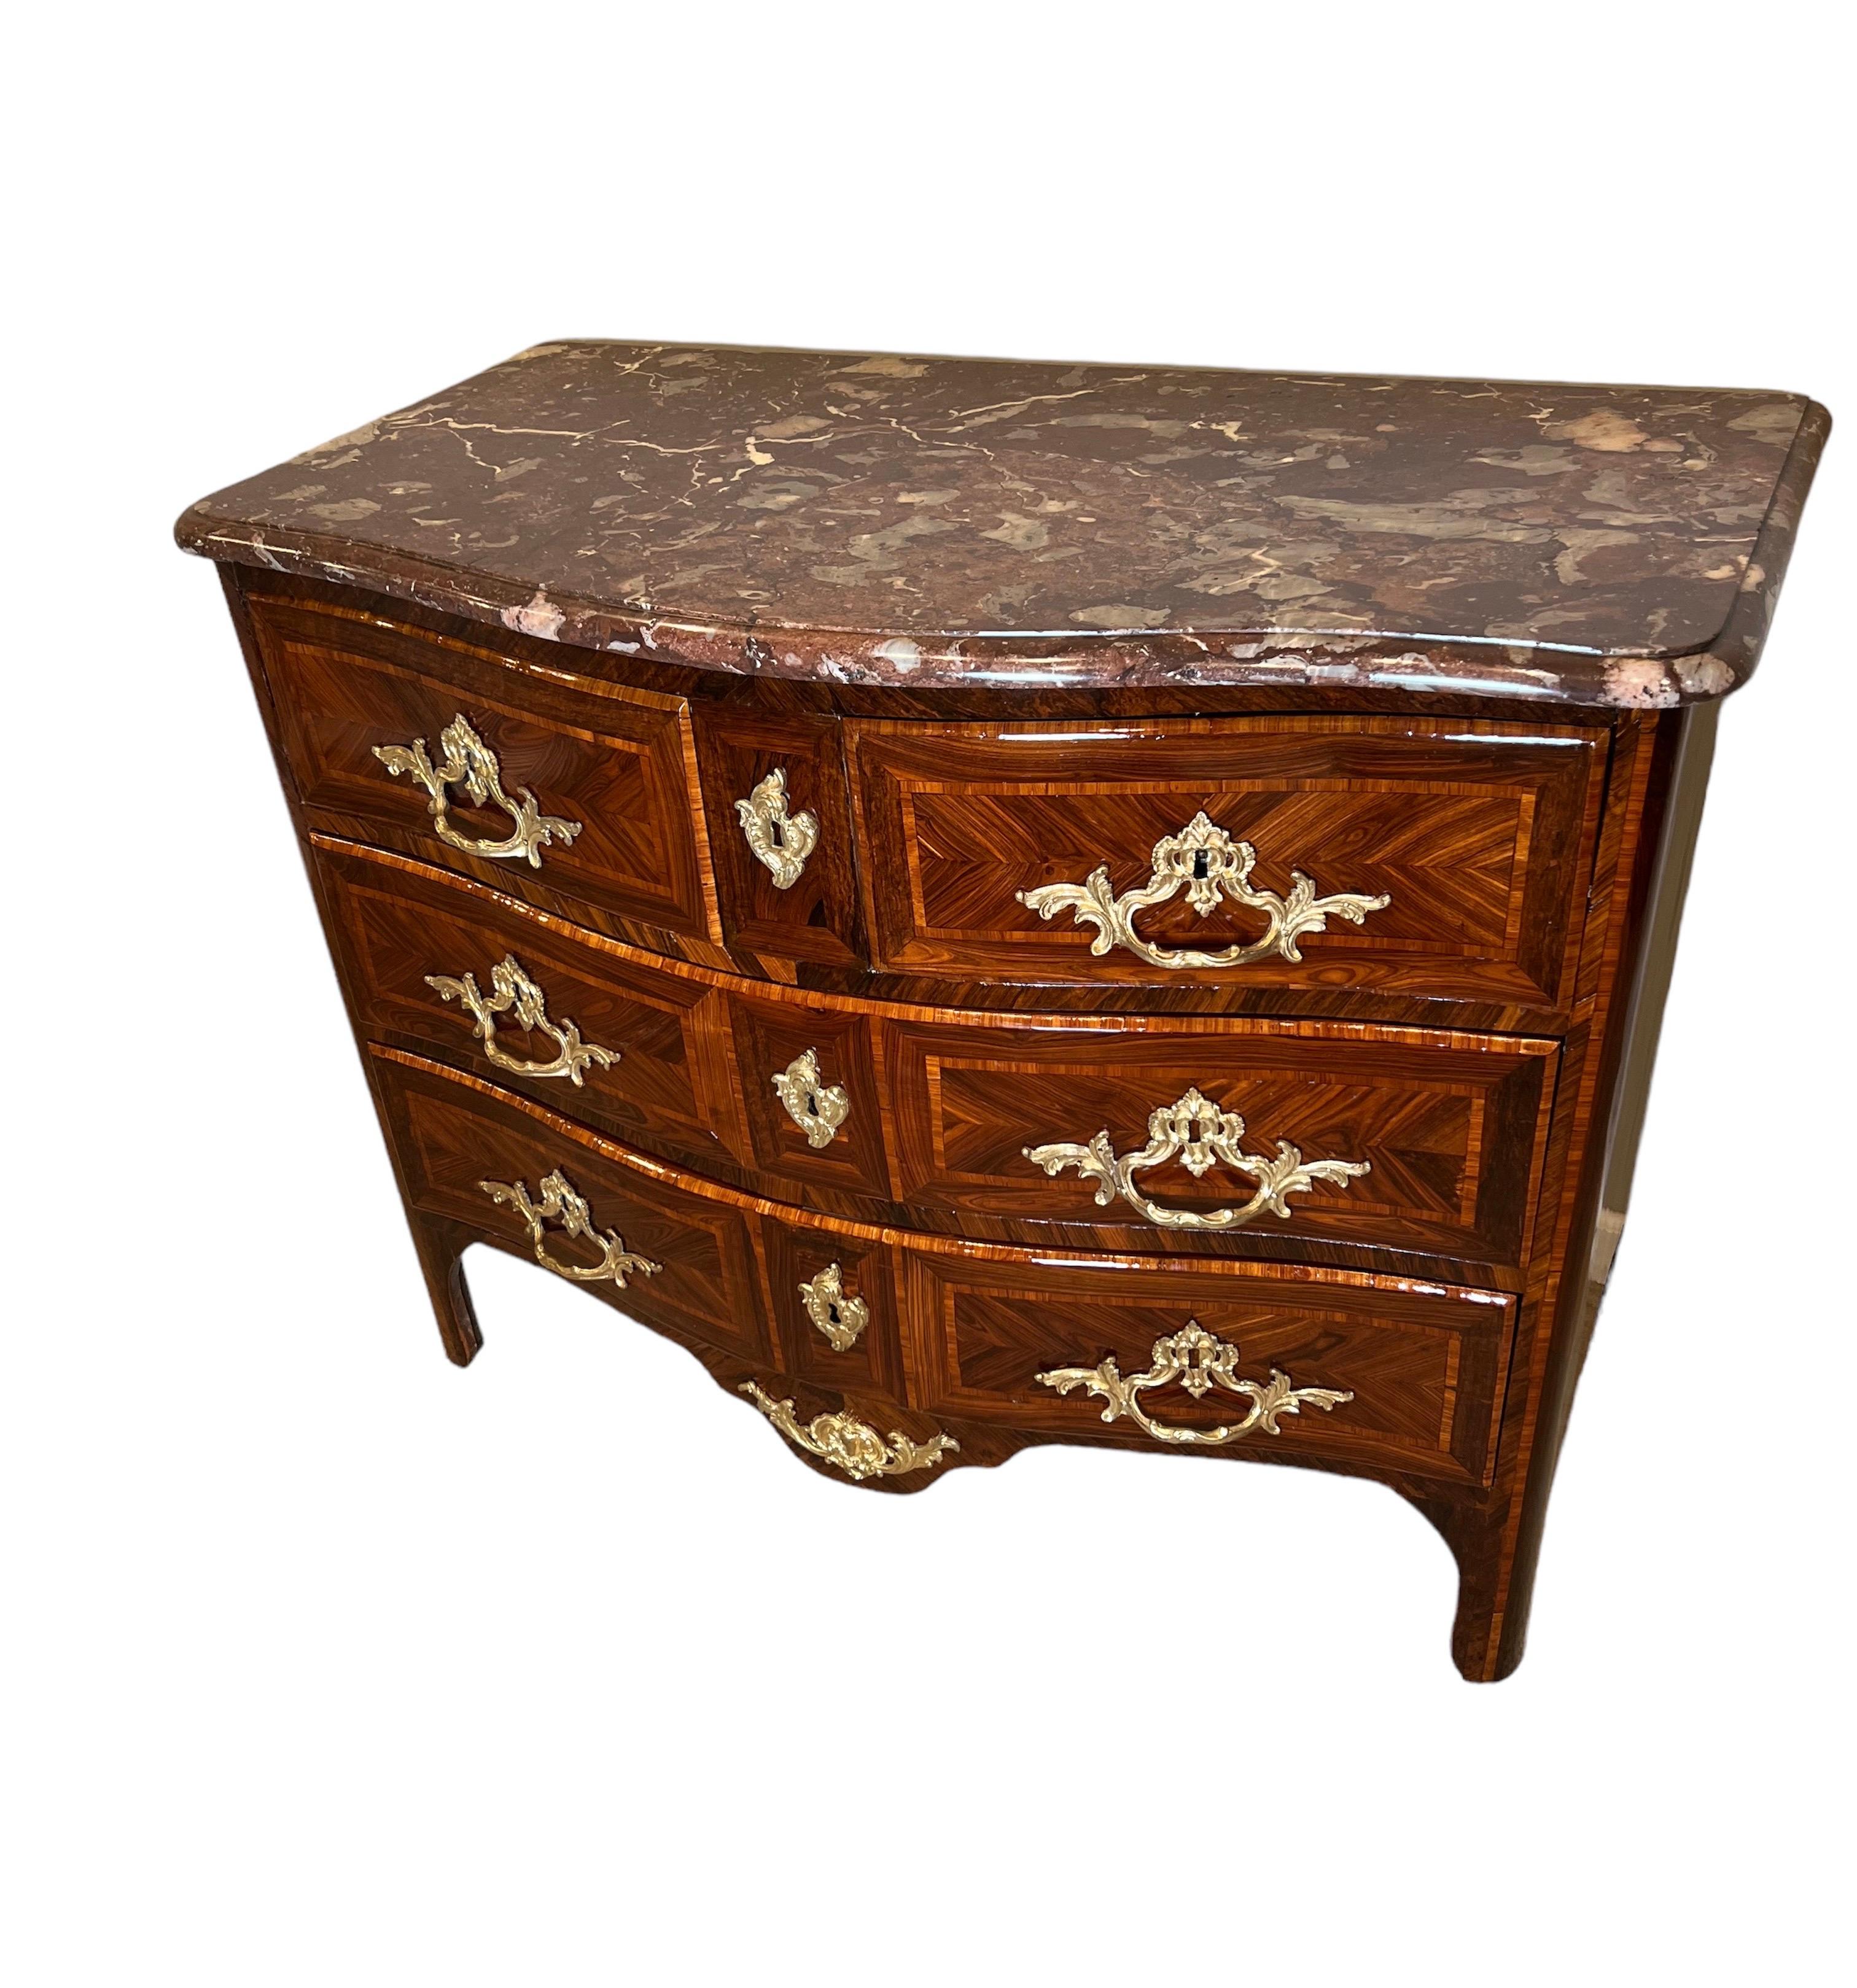 French Régence Ormolu-Mounted Rosewood & Kingwood Inlay Rouge Marble Top Commode, sign. J.F. LAPIE (Jean François Lapie ) , with guild stamp, Paris circa 1730. Tulipwood, rosewood and partly dyed precious woods in veneer and inlaids, centrally